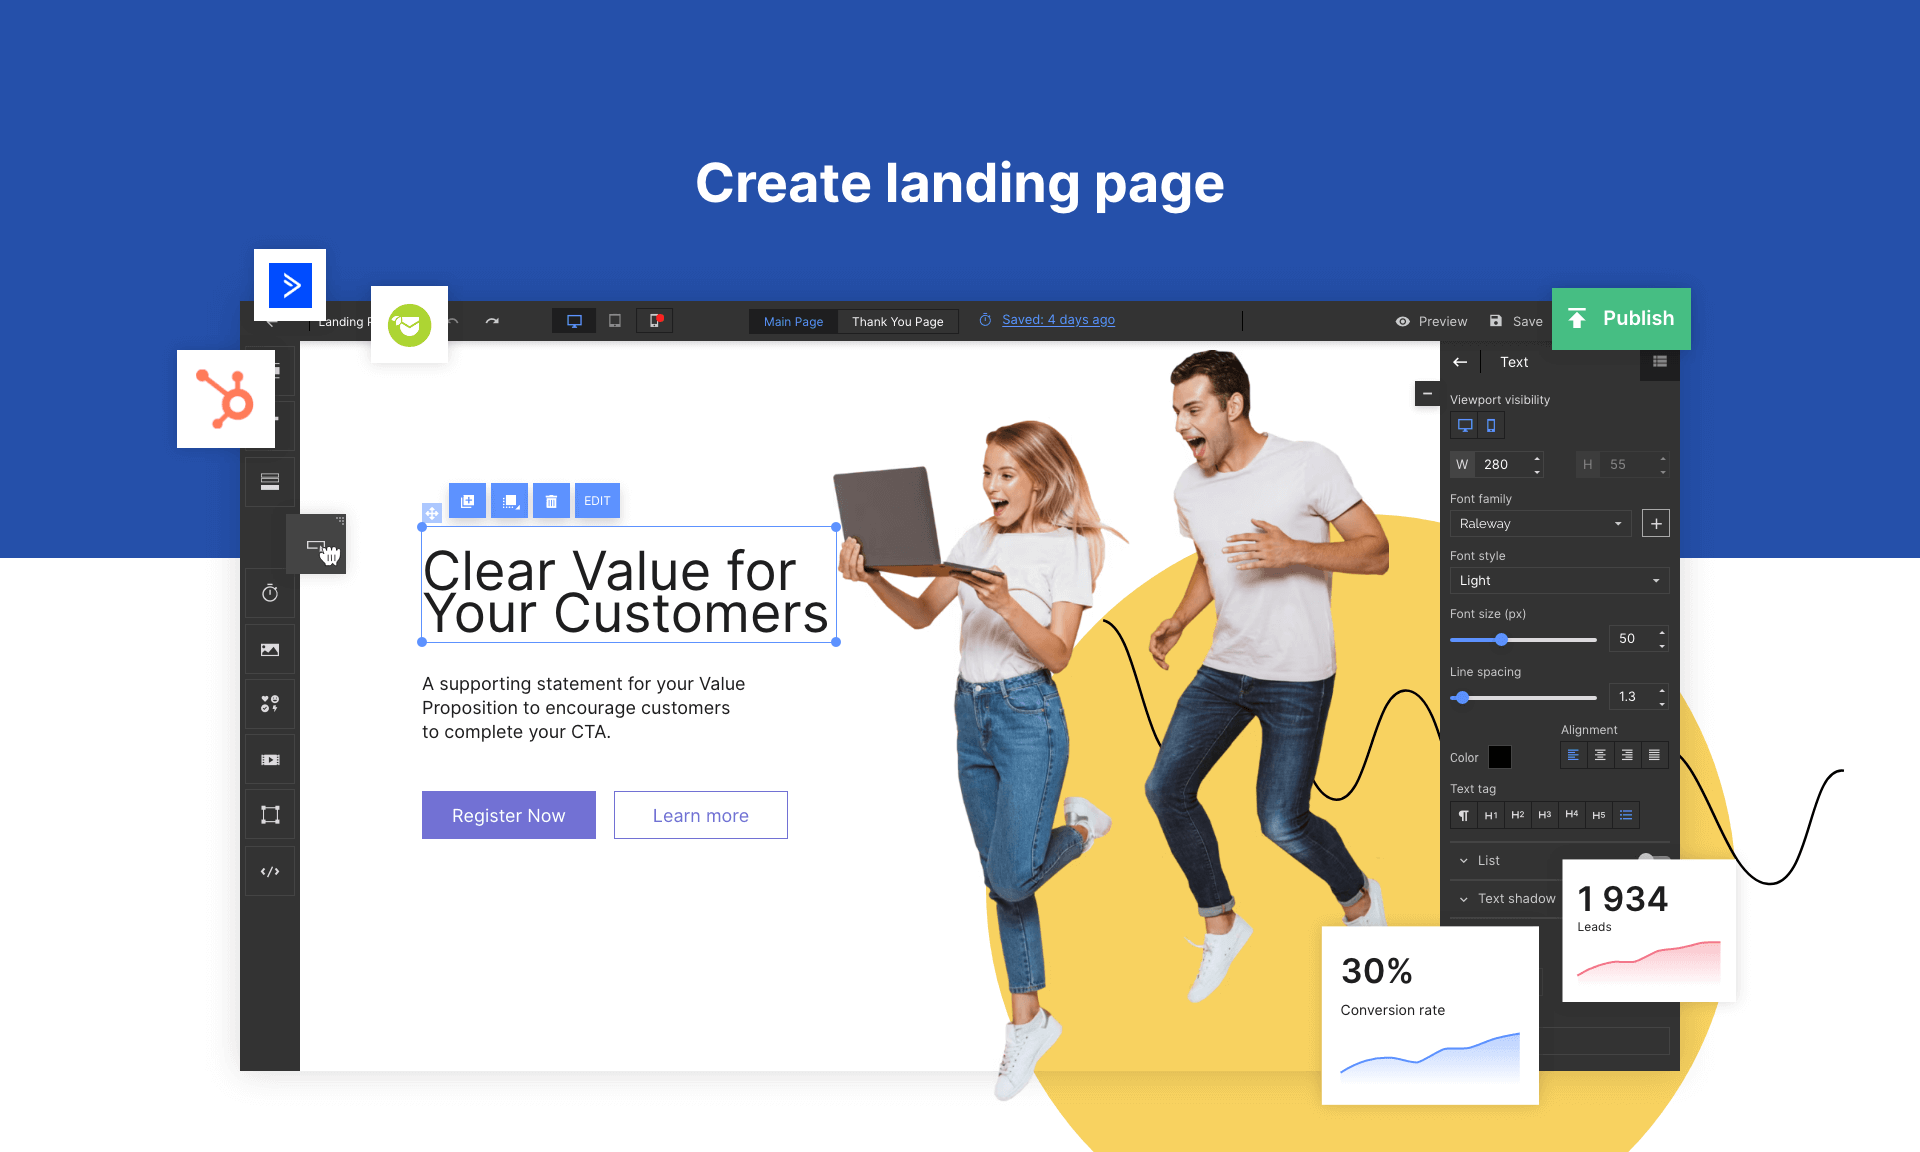 Create high-converting landing pages, microsites, pop-ups, lightboxes, and much more with no code drag-and-drop builder. Utilize one of 400+ fully customizable templates for various goals or industries and take your campaigns to the next level. 